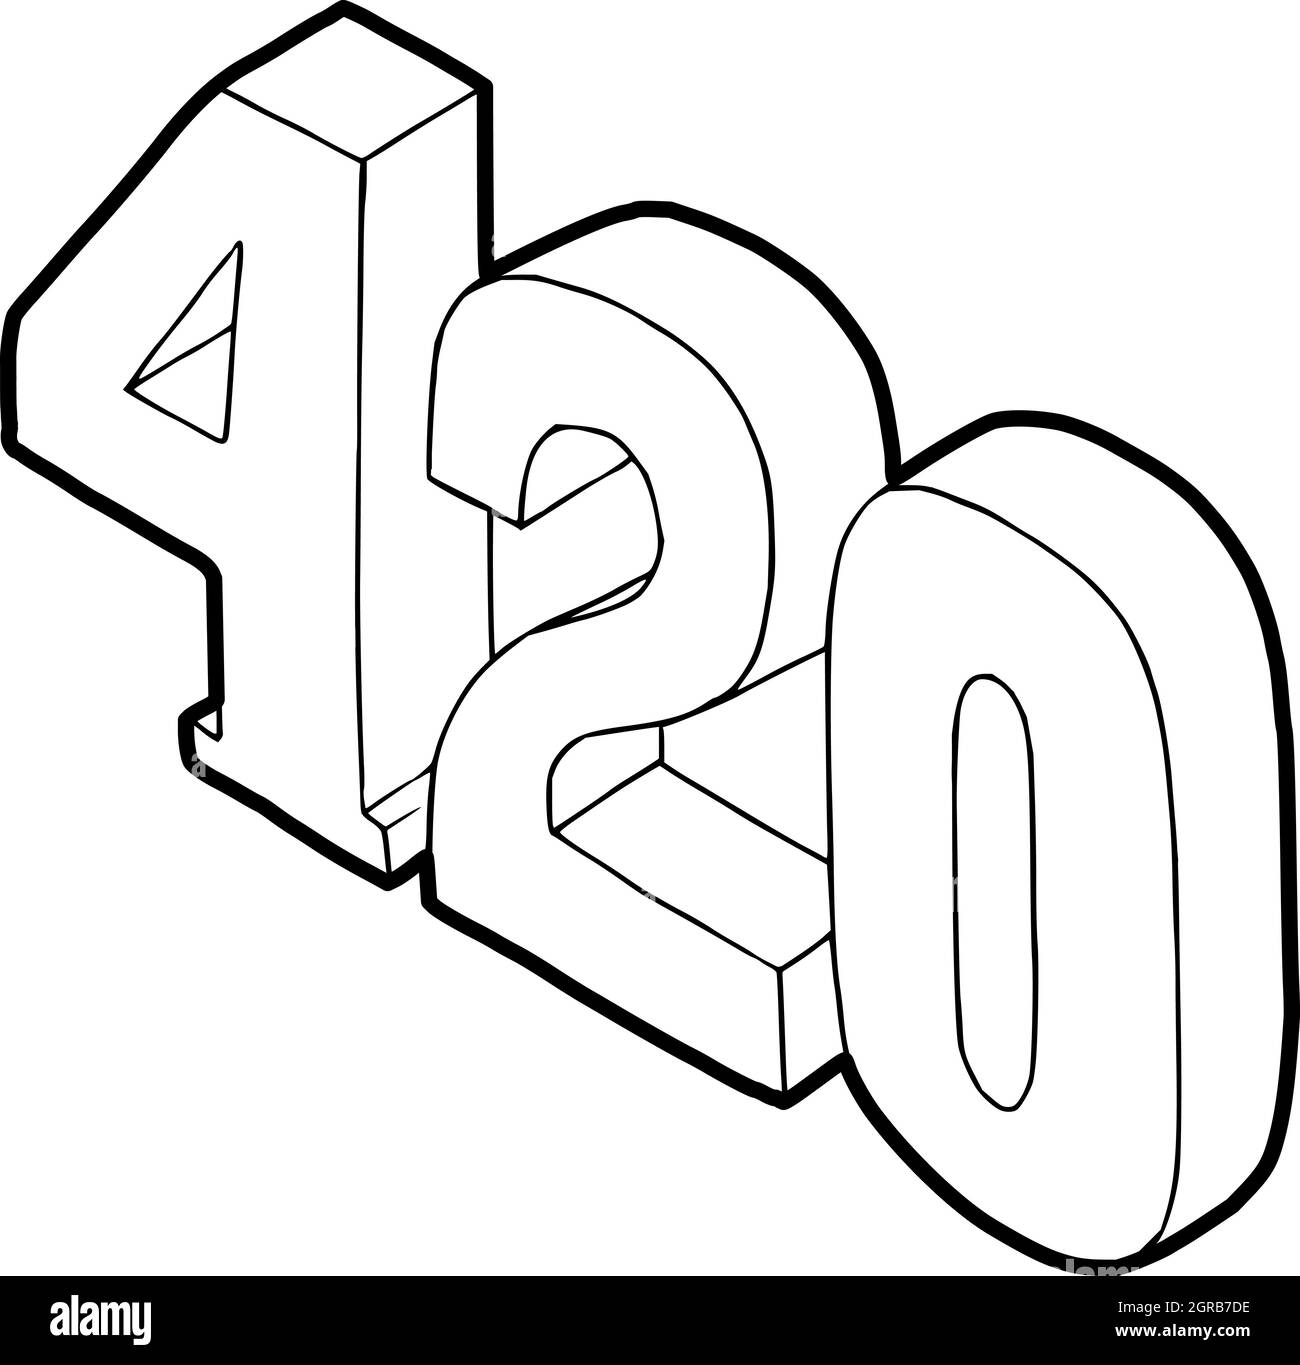 420 Stock Vector Images - Alamy